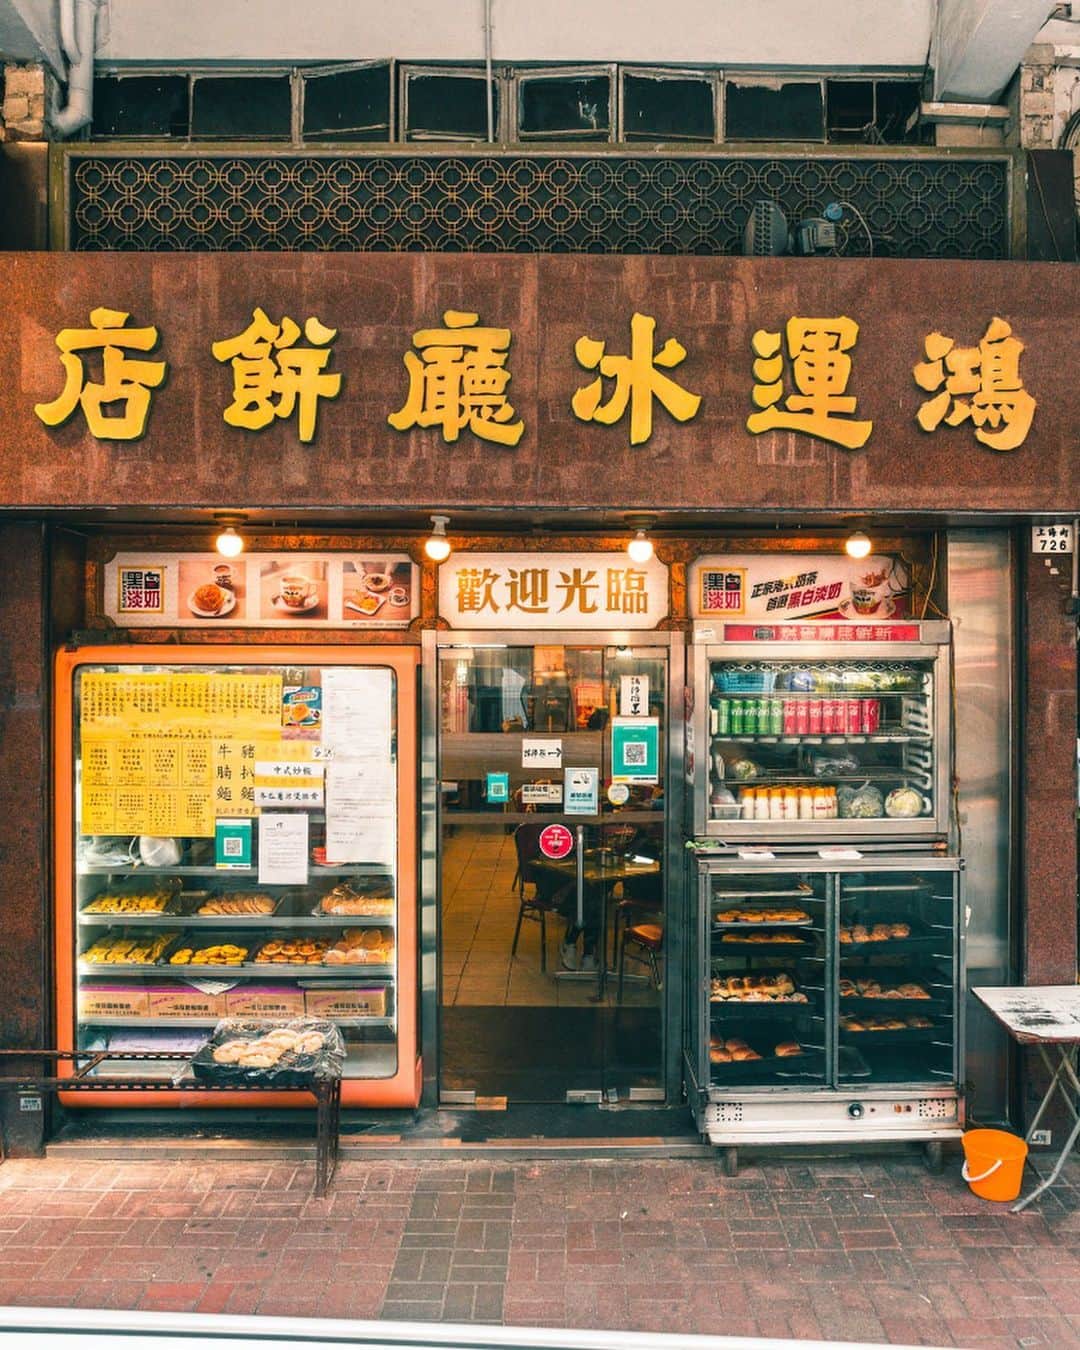 Discover Hong Kongさんのインスタグラム写真 - (Discover Hong KongInstagram)「[Discovering the flavours of Hong Kong: Two-storey cha chaan teng, indulging in freshly baked egg tarts!] It’s no secret that local foodies in Hong Kong love cha chaan tengs for their perfect mix of East meets West dishes and generous portions that won’t break the bank. How about dining in a two-storey vintage-style cha chaan teng? 😎 You’re looking at the legendary “Lucky Cafe” from Stephen Chow’s hit film “The Lucky Guy”. 😲 There are vintage bread cabinets, Hong Kong-style wooden booths, and an atmosphere that’s reminiscent of the past! ☺️ You won’t want to stop there! Try their mouthwatering egg tarts and other delicious Hong Kong-style pastries. ❤️ Trust us, they’re not just Instagrammable📷, they’re delicious! 😋  【尋嚐香港地：兩層懷舊冰廳，歎新鮮出爐蛋撻】 茶餐廳一直都係唔少人嘅至愛，鍾意佢中西合壁，大件夾抵食，但兩層嘅冰廳你又去過未？😎 兩層冰廳喺香港買少見少，呢間餐廳望落熟口熟面，因為佢就係周星馳主演電影《行運一條龍》中嘅行運茶餐廳！😲 裝潢仍保留老香港懷舊風格，沿用舊式麵包櫃、港式木製卡位等等，超經典！❤️ 大家到訪除咗打卡📷，記得一定要試佢哋嘅曲奇皮蛋撻，仲有唔同嘅港式糕點！😋  #HelloHongKong #DiscoverHongKong  🍽️✨🍽️✨🍽️✨🍽️✨🍽️✨🍽️✨🍽️✨🍽️✨🍽️✨🍽️✨ Hong Kong welcomes you✈️! Now travellers can get ‘Hong Kong Goodies’ 🛍️vouchers including one FREE welcome drink🍸 in the hottest bars! Check out the details here: bit.ly/HelloHKgoodiesEN. Hope to see you all soon! 香港歡迎你✈️！而家遊客仲可以享用「香港有禮🛍️」消費優惠券，去得獎酒吧免費飲返杯🍸🍹！詳情請留意 bit.ly/HelloHKgoodiesTC」4月19日 19時32分 - discoverhongkong